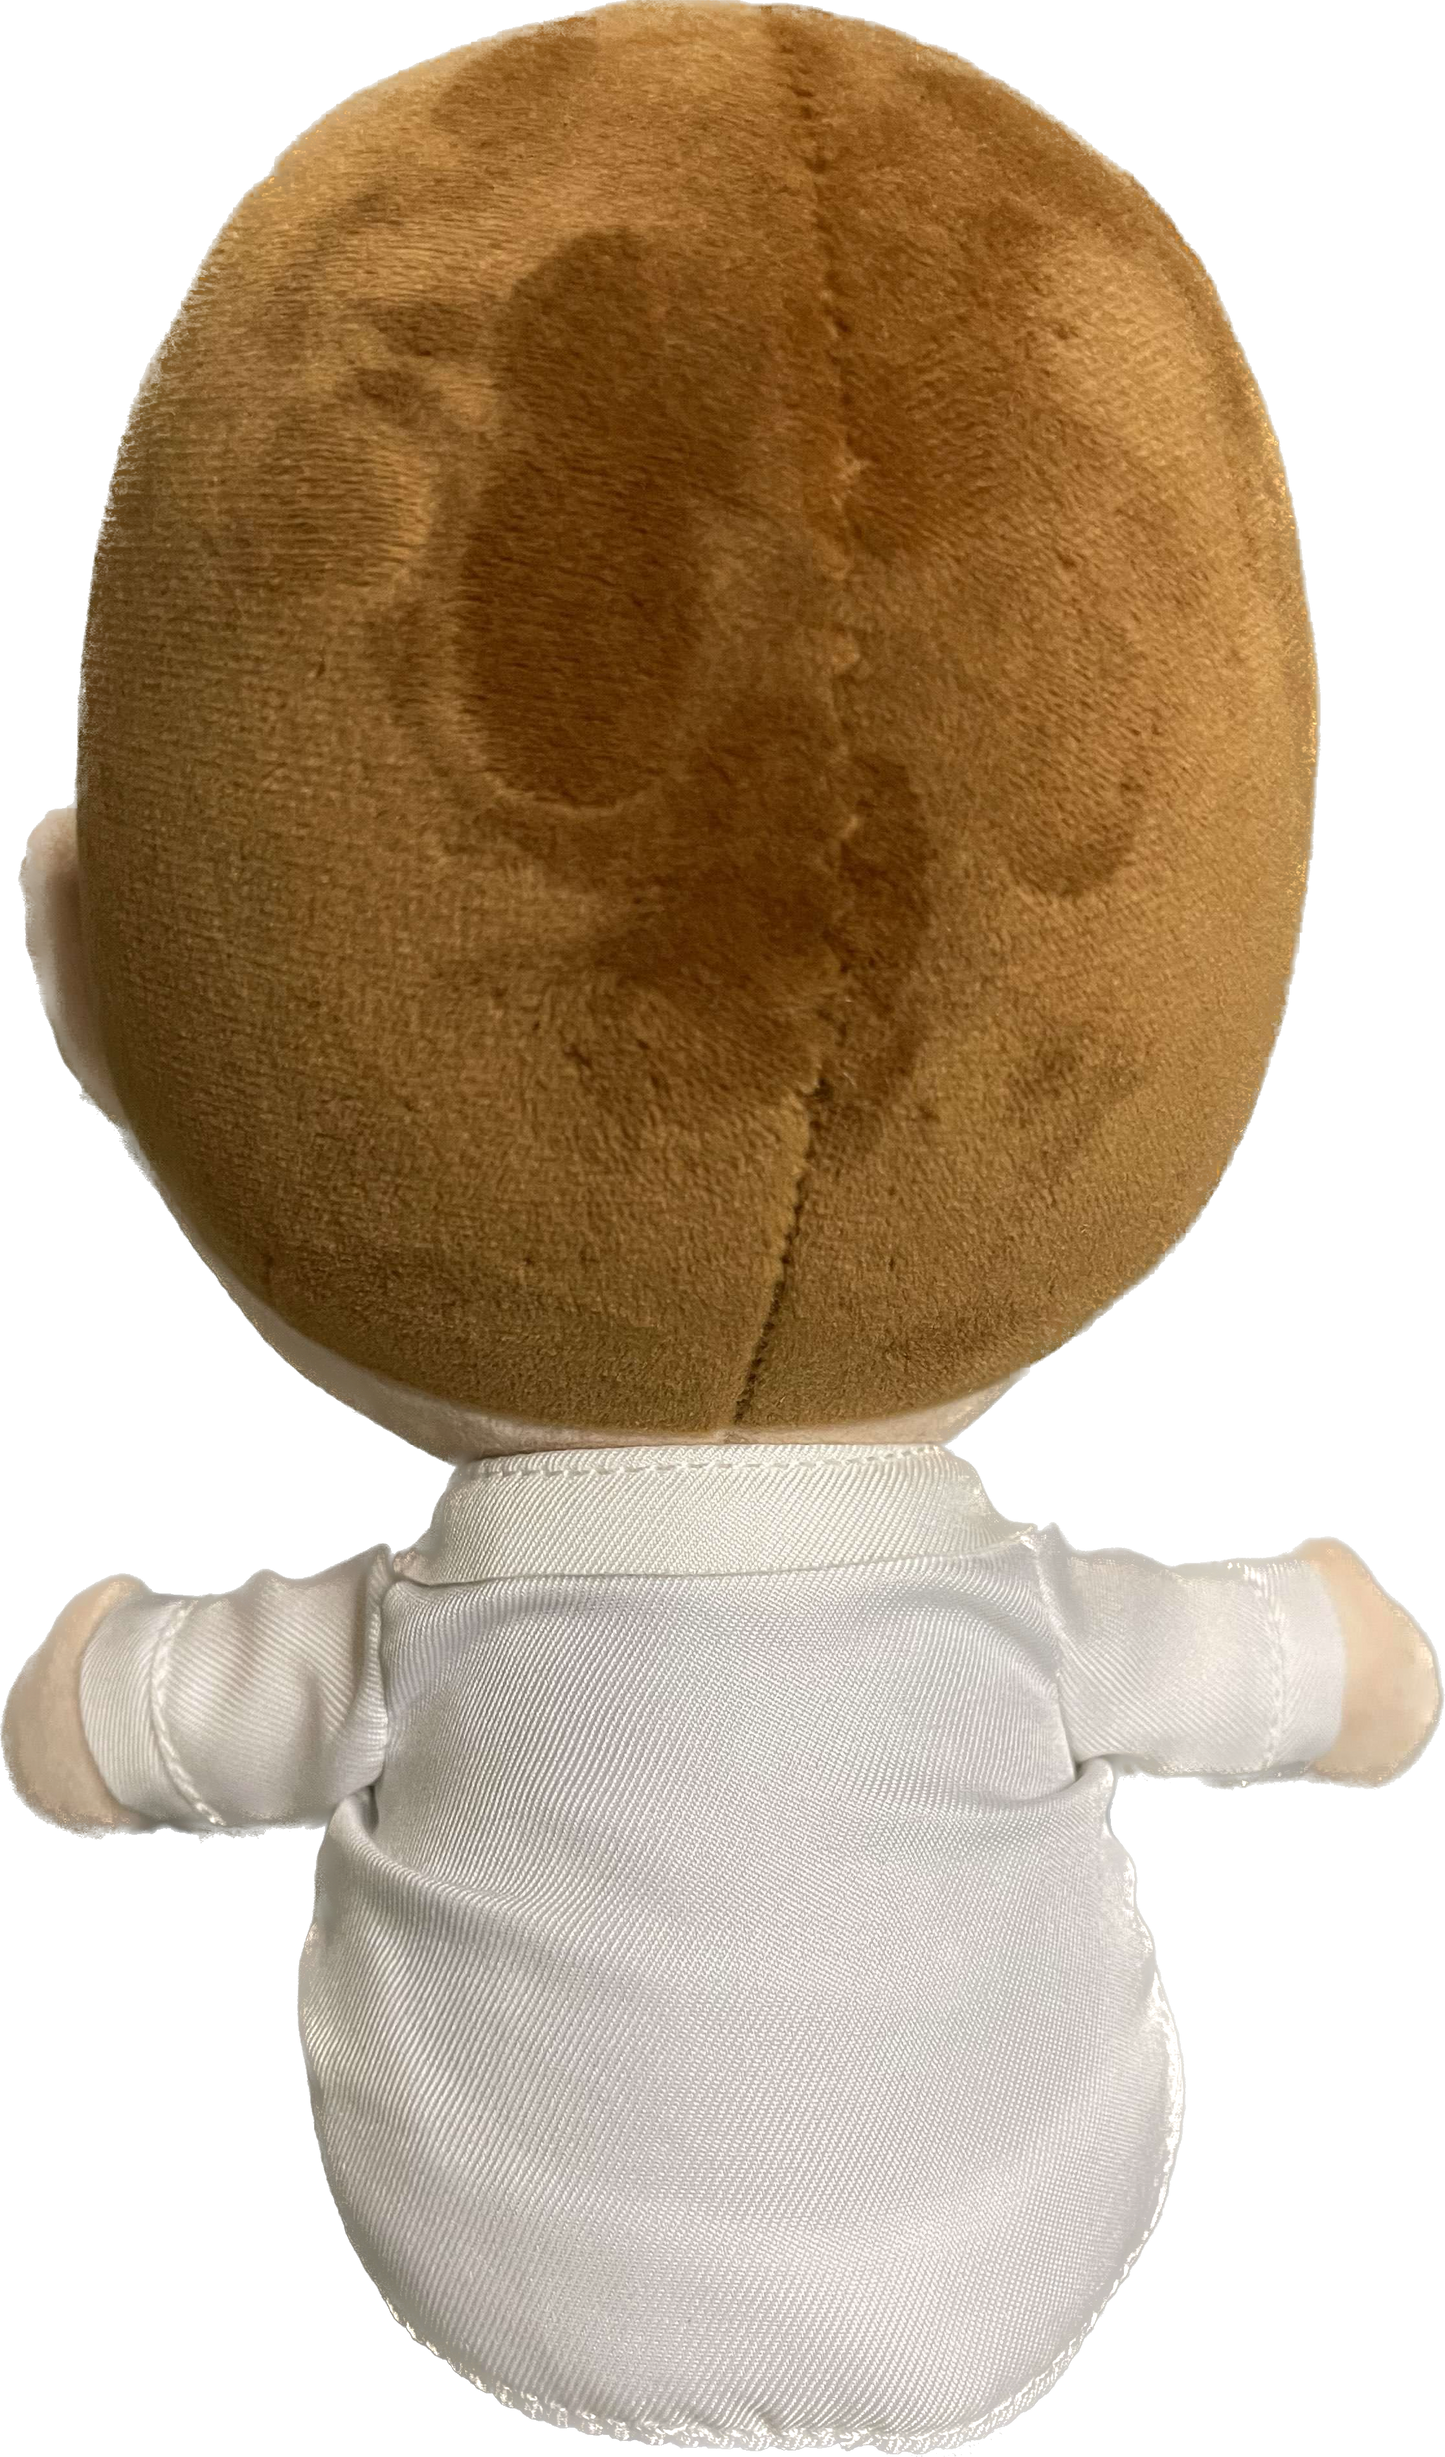 Dr. Theron Sherman from Site-42 Plush - Limited Release - Order Before December 31st!